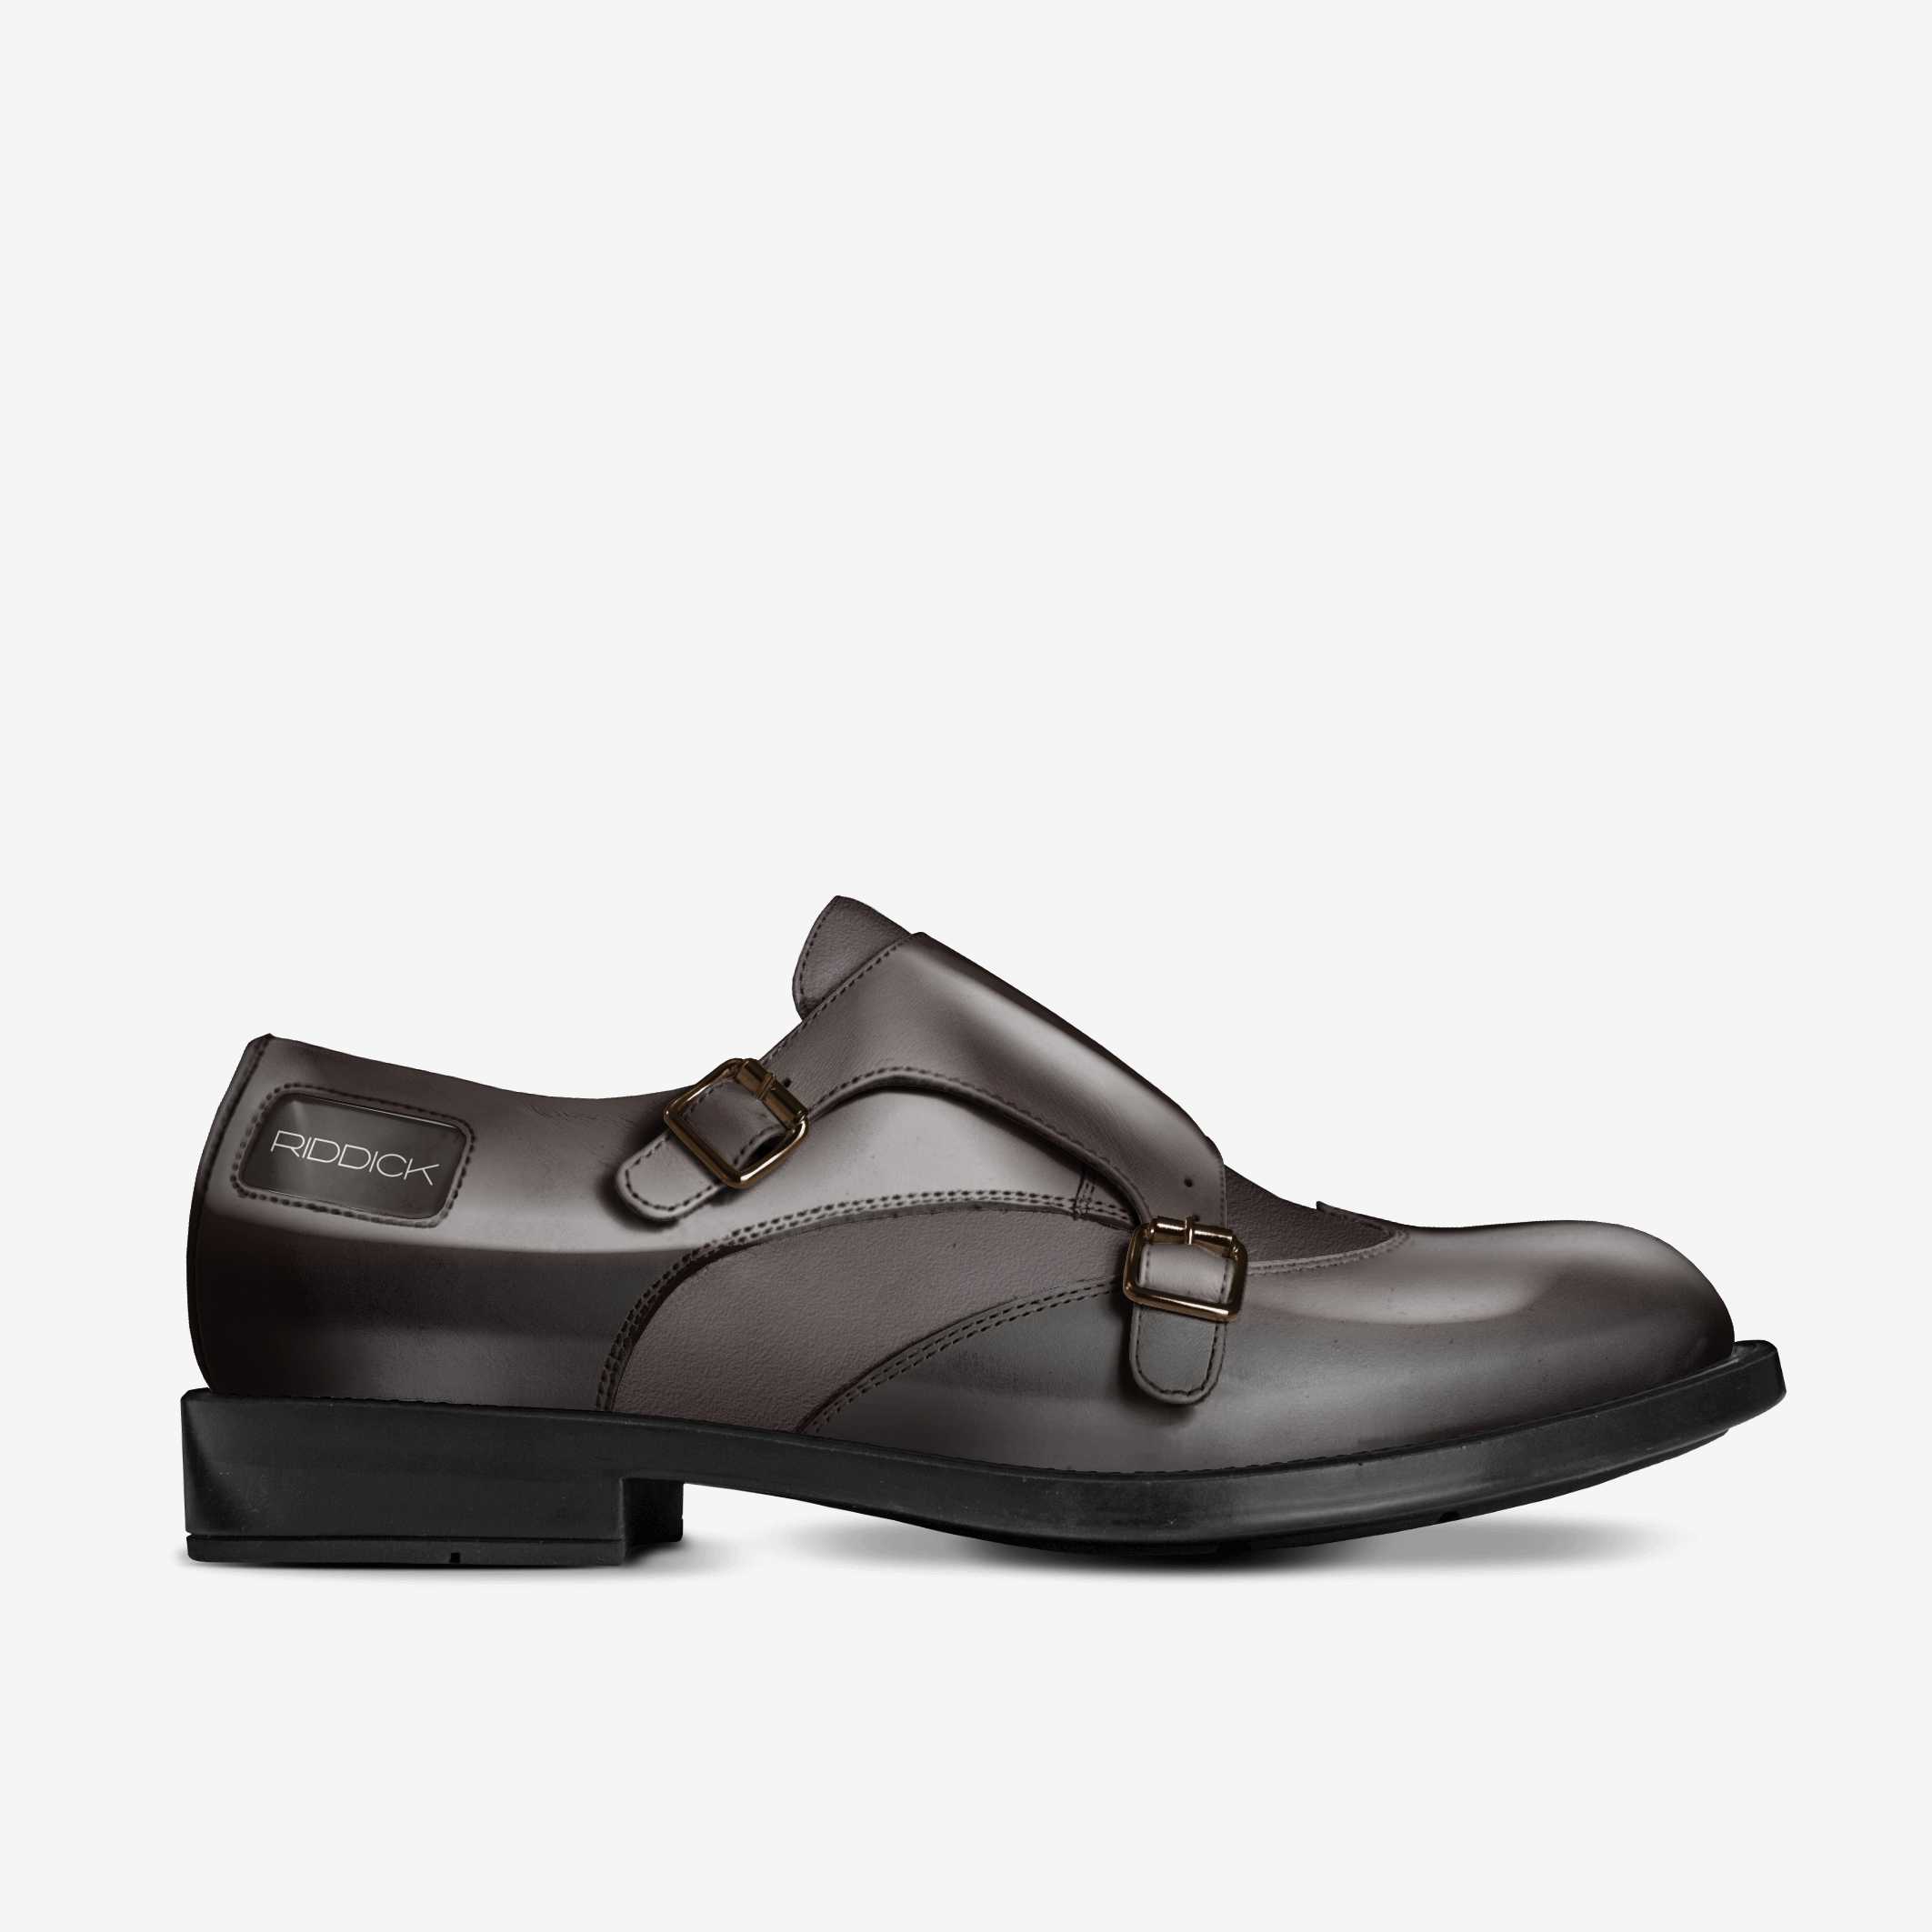 EXEC, STRAPPED (IN TOBACCO) - Riddick Shoes Shoe Riddick Shoes   